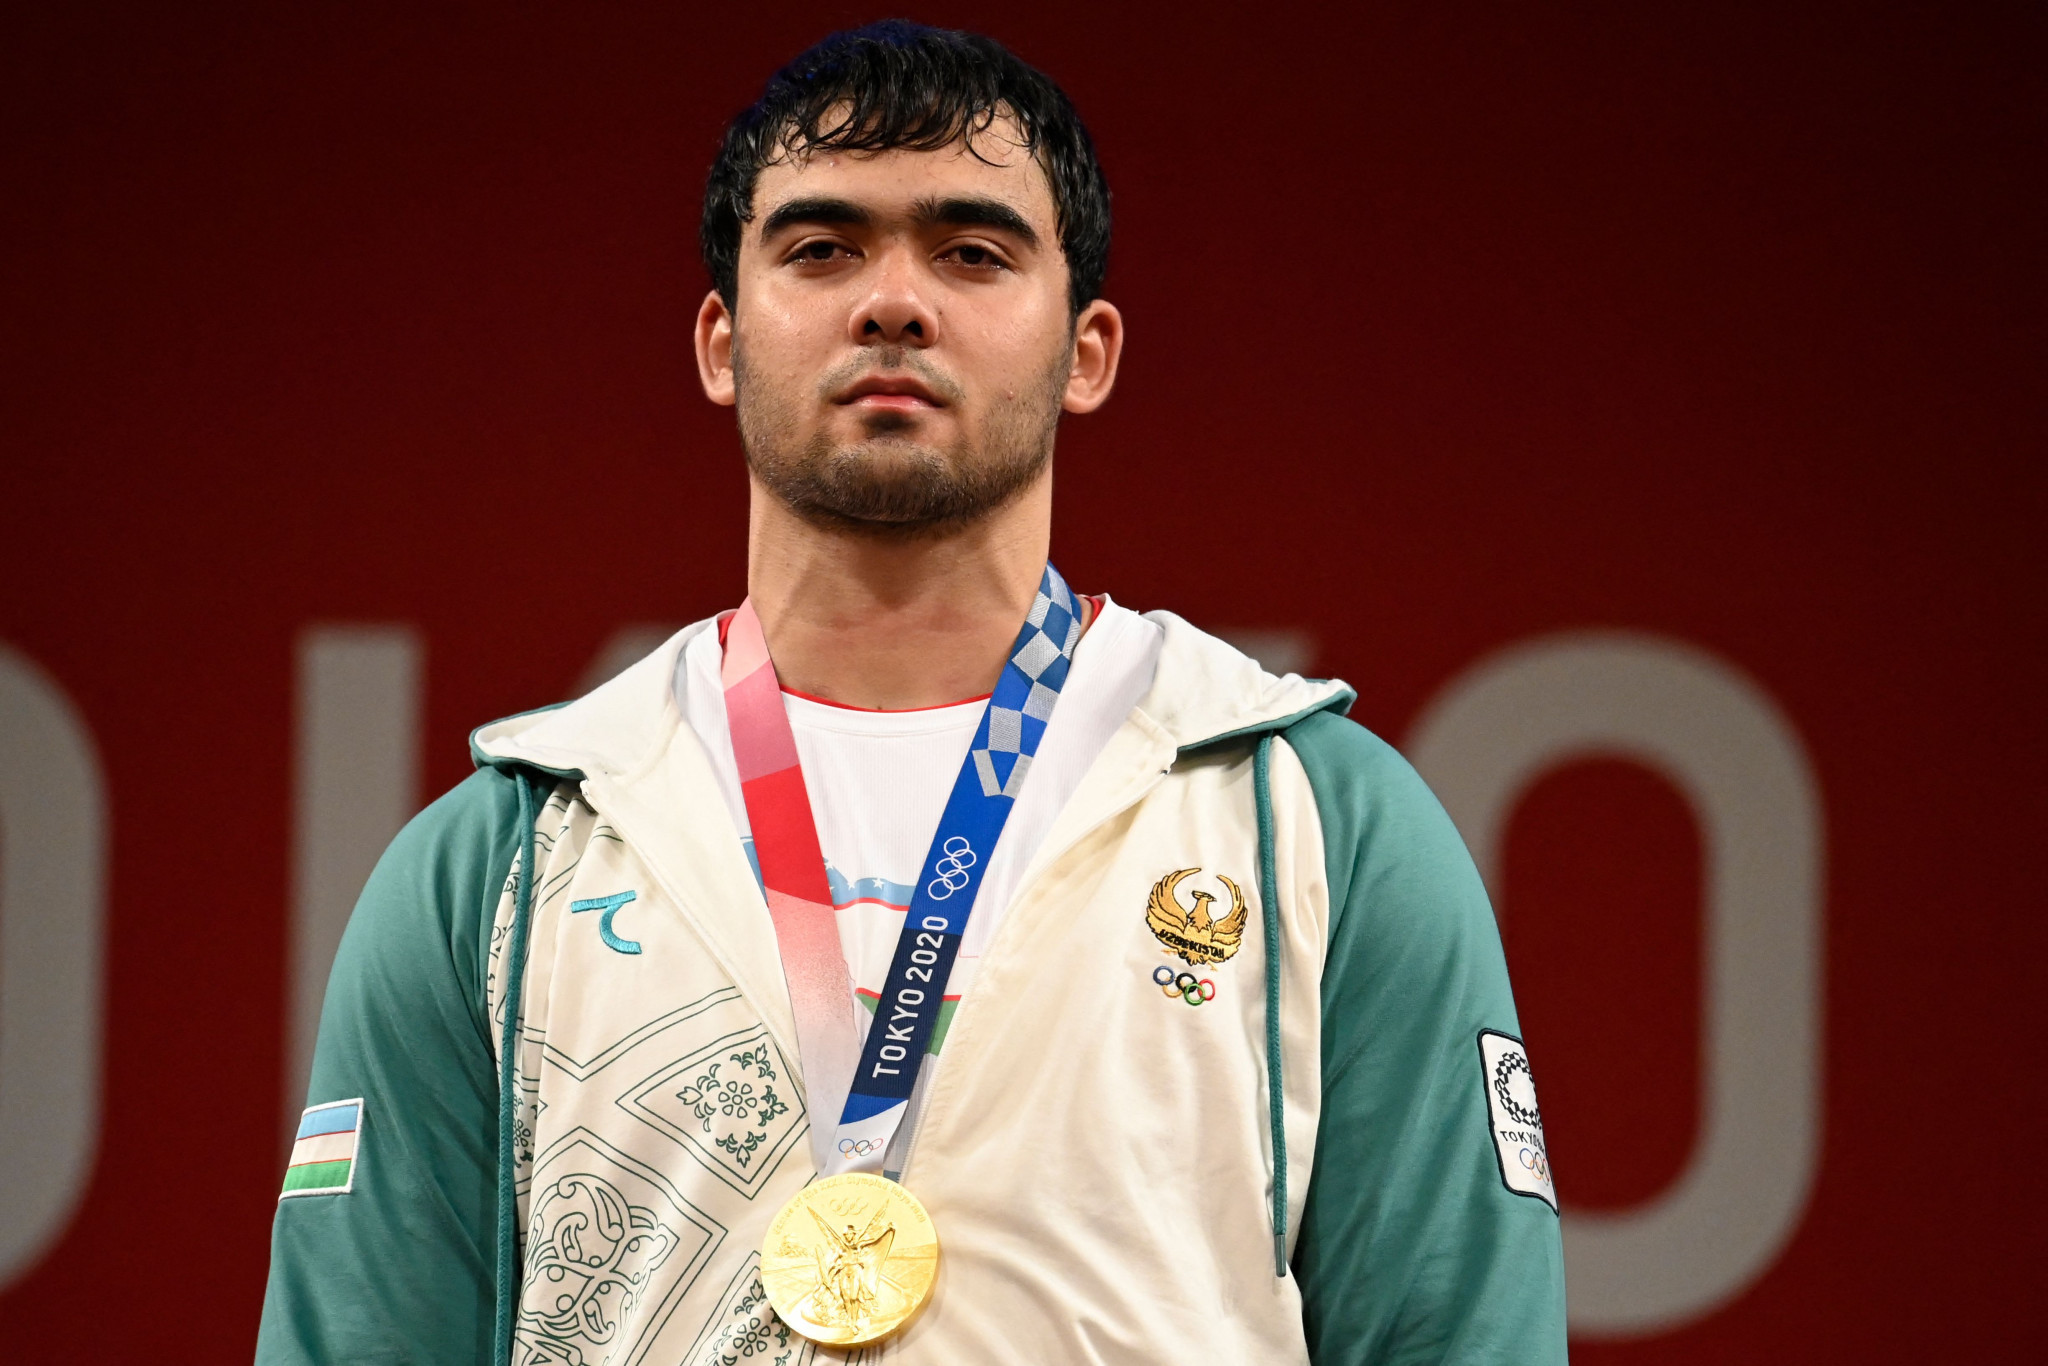 Tokyo 2020 gold medallist Akbar Djuraev has moved up in weight class ©Getty Images